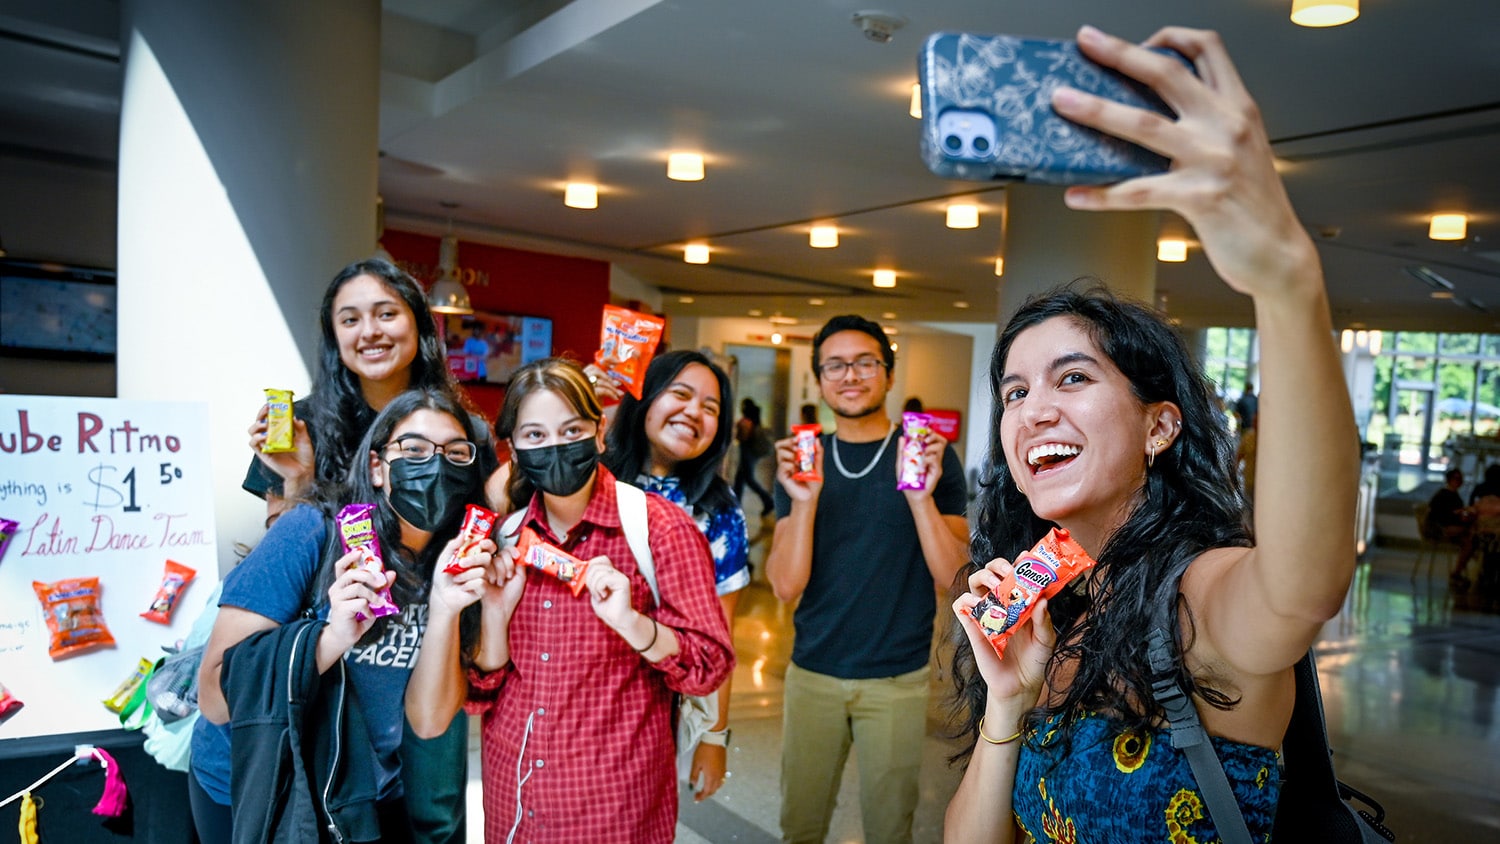 Students snap a quick selfie while tabling in the atrium of Talley Student Union.